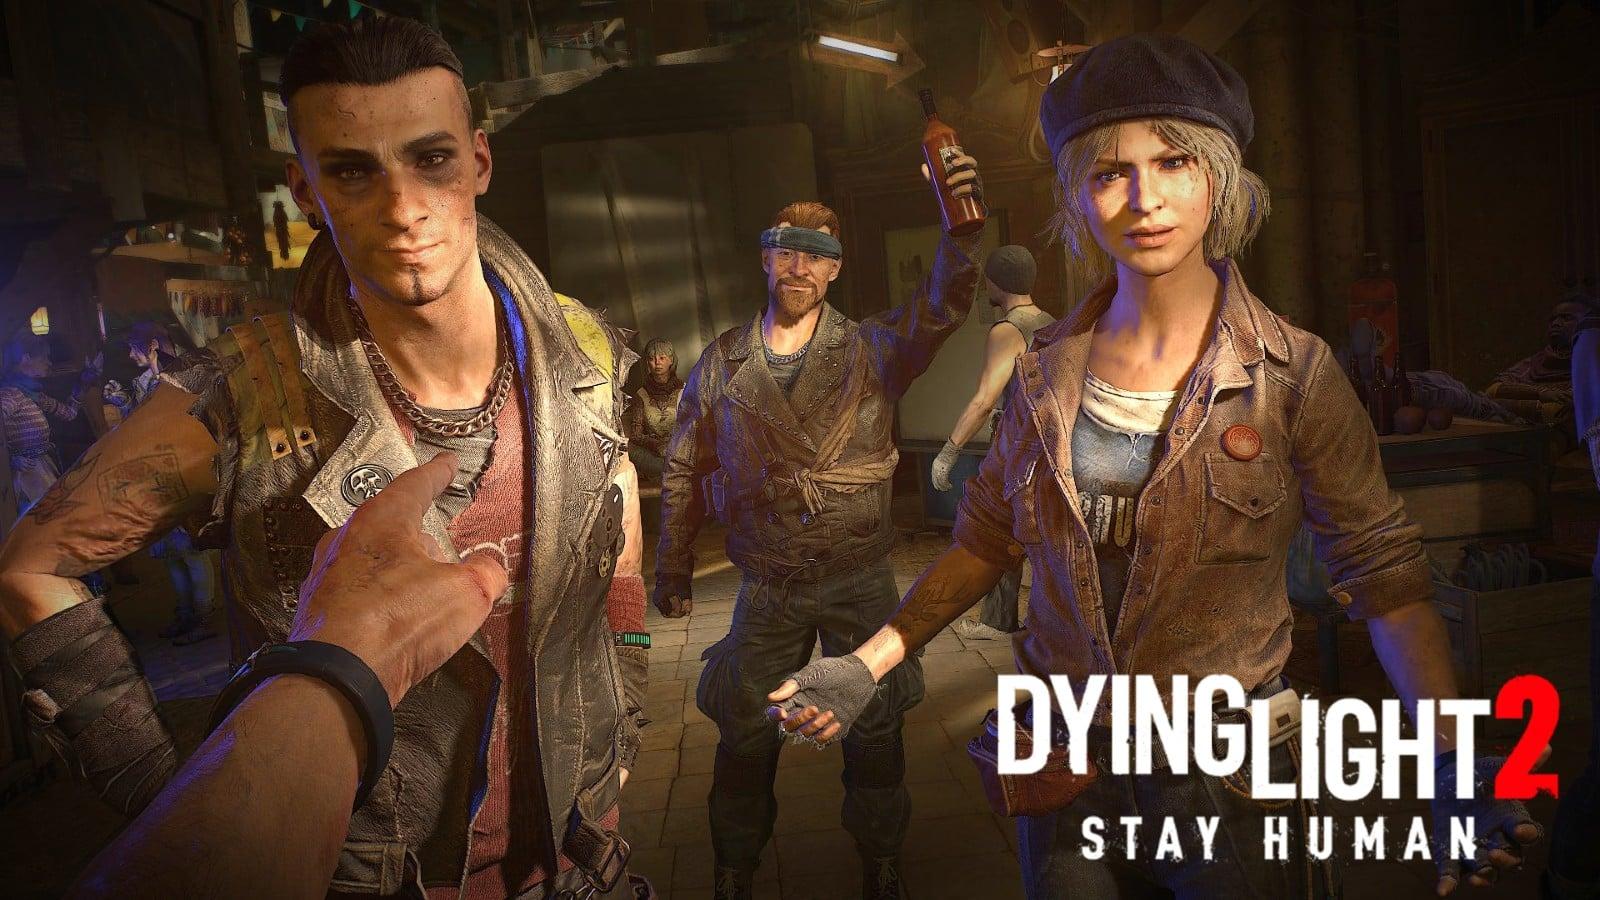 Dying Light 2 Co-op Guide: How to Play Multiplayer with Friends in